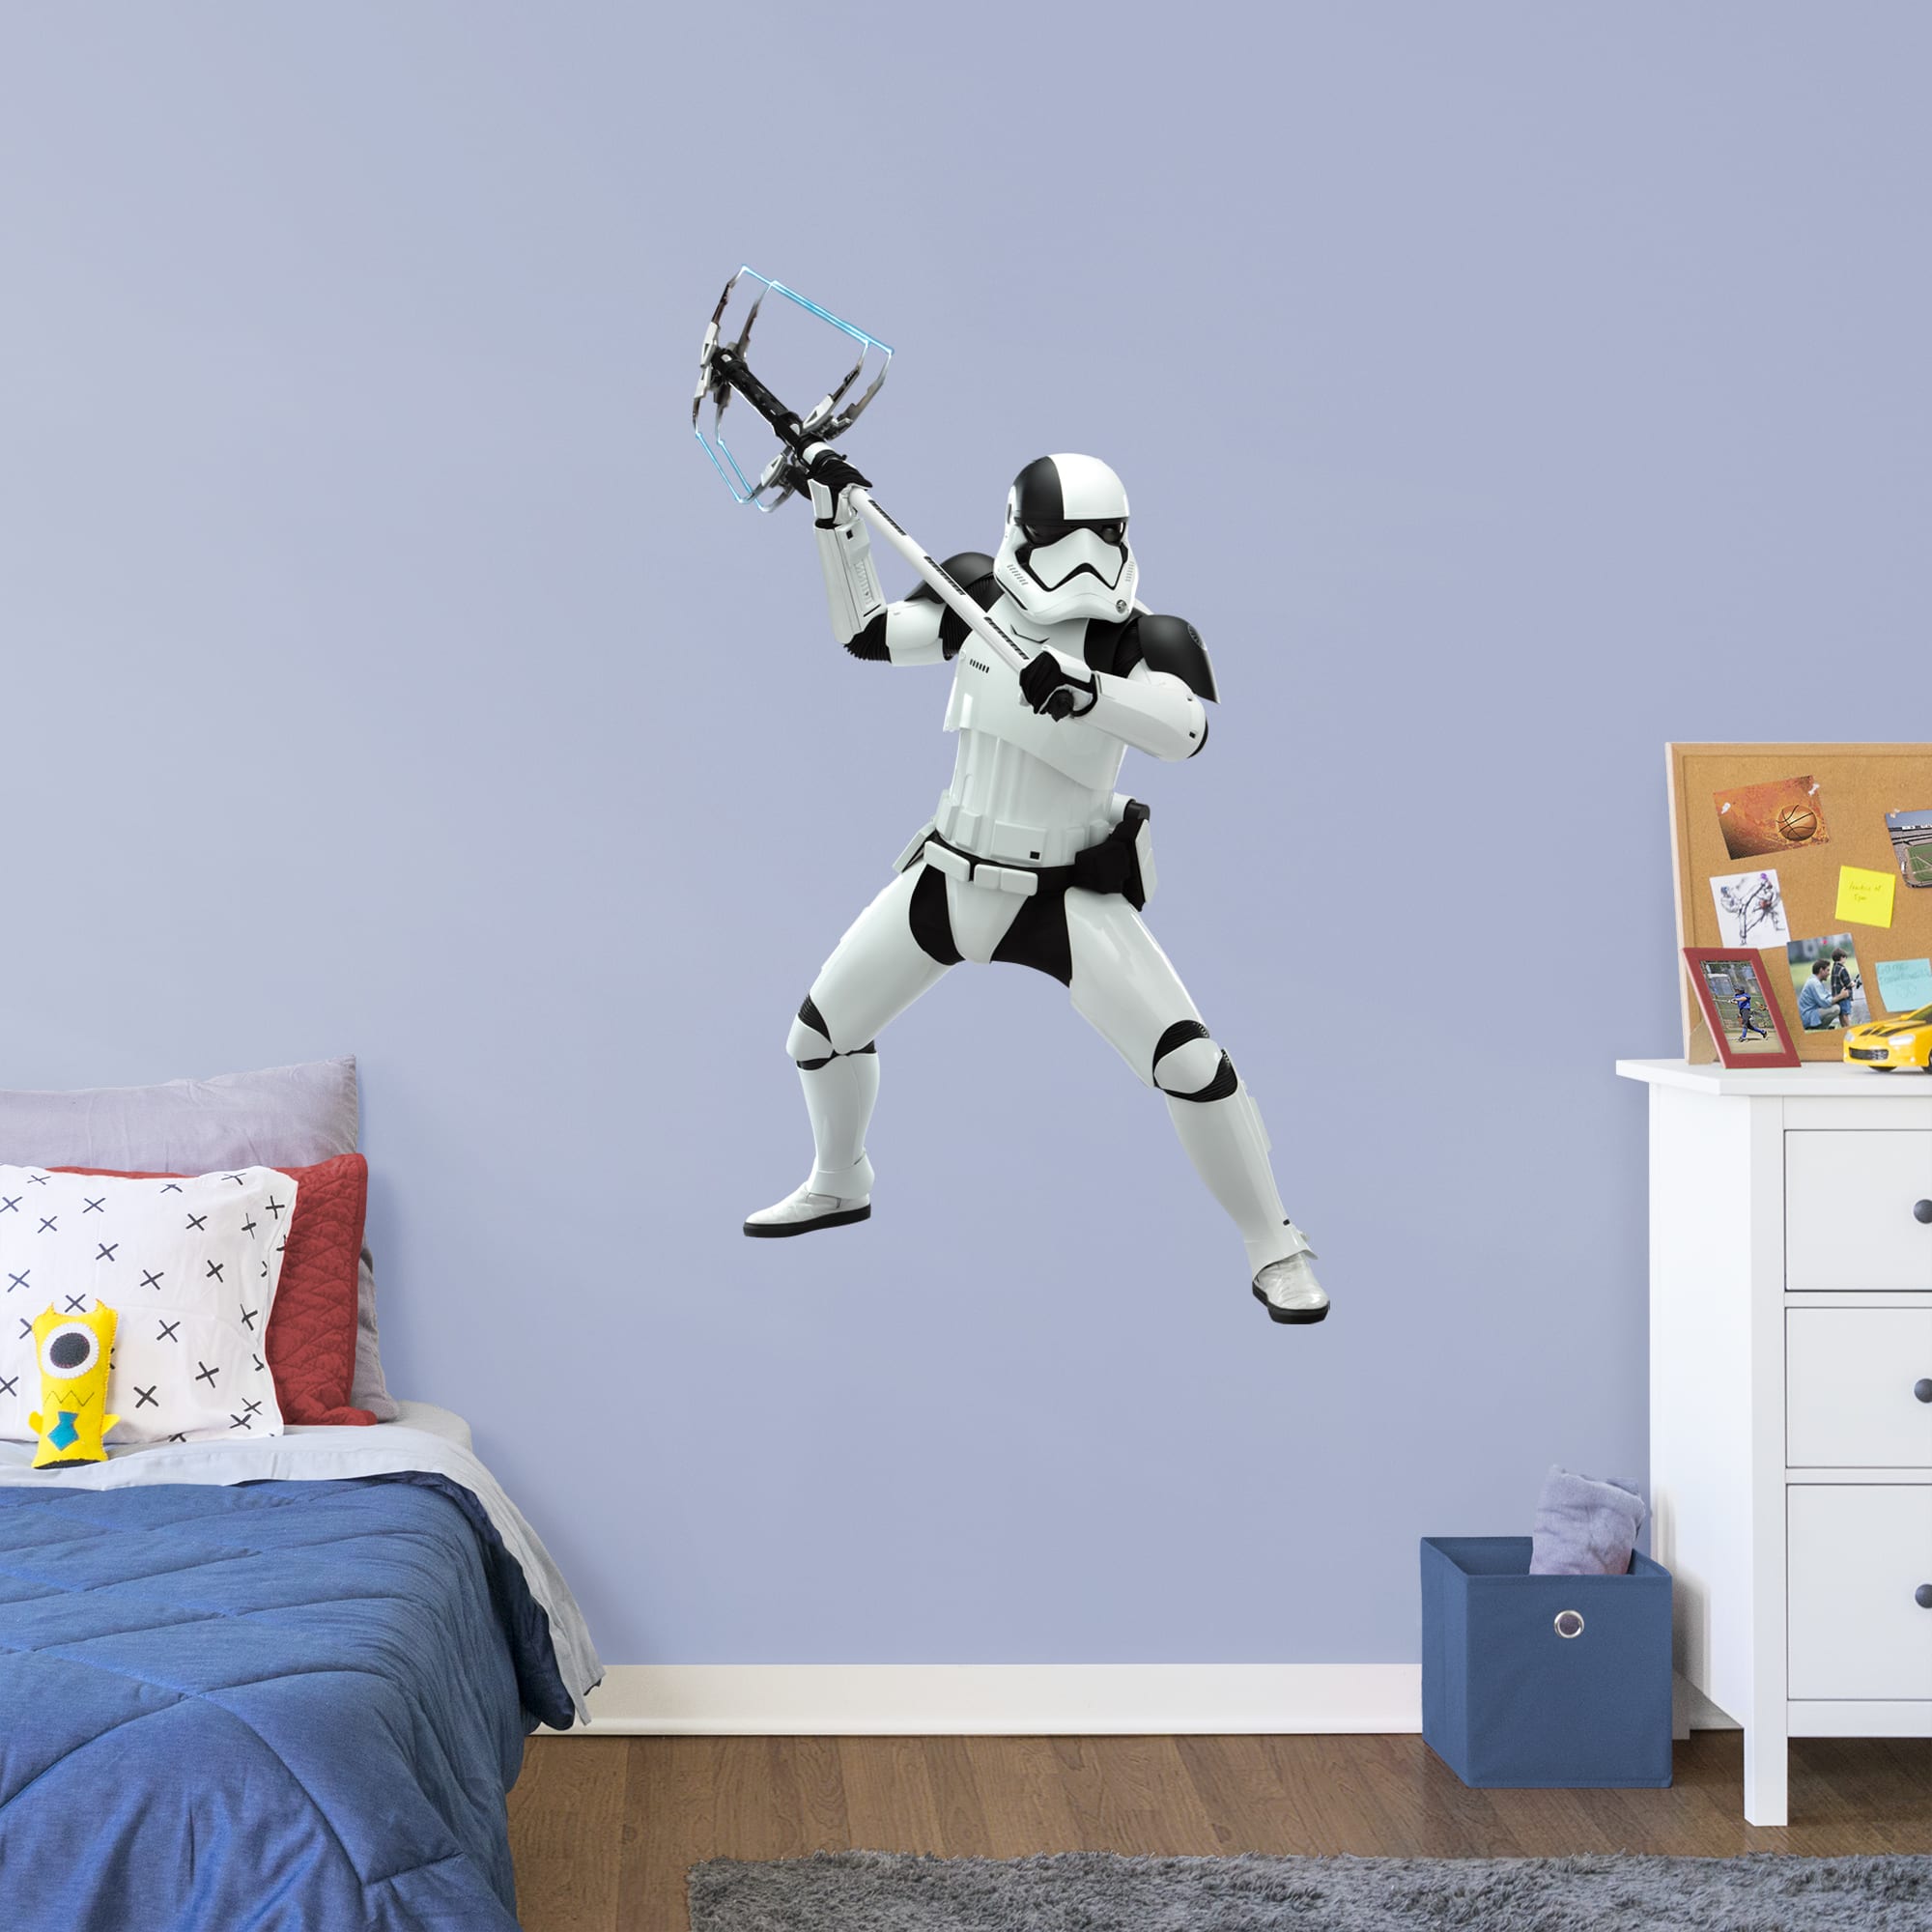 Executioner Trooper - Officially Licensed Removable Wall Decal Giant Character + 2 Decals (37"W x 62"H) by Fathead | Vinyl